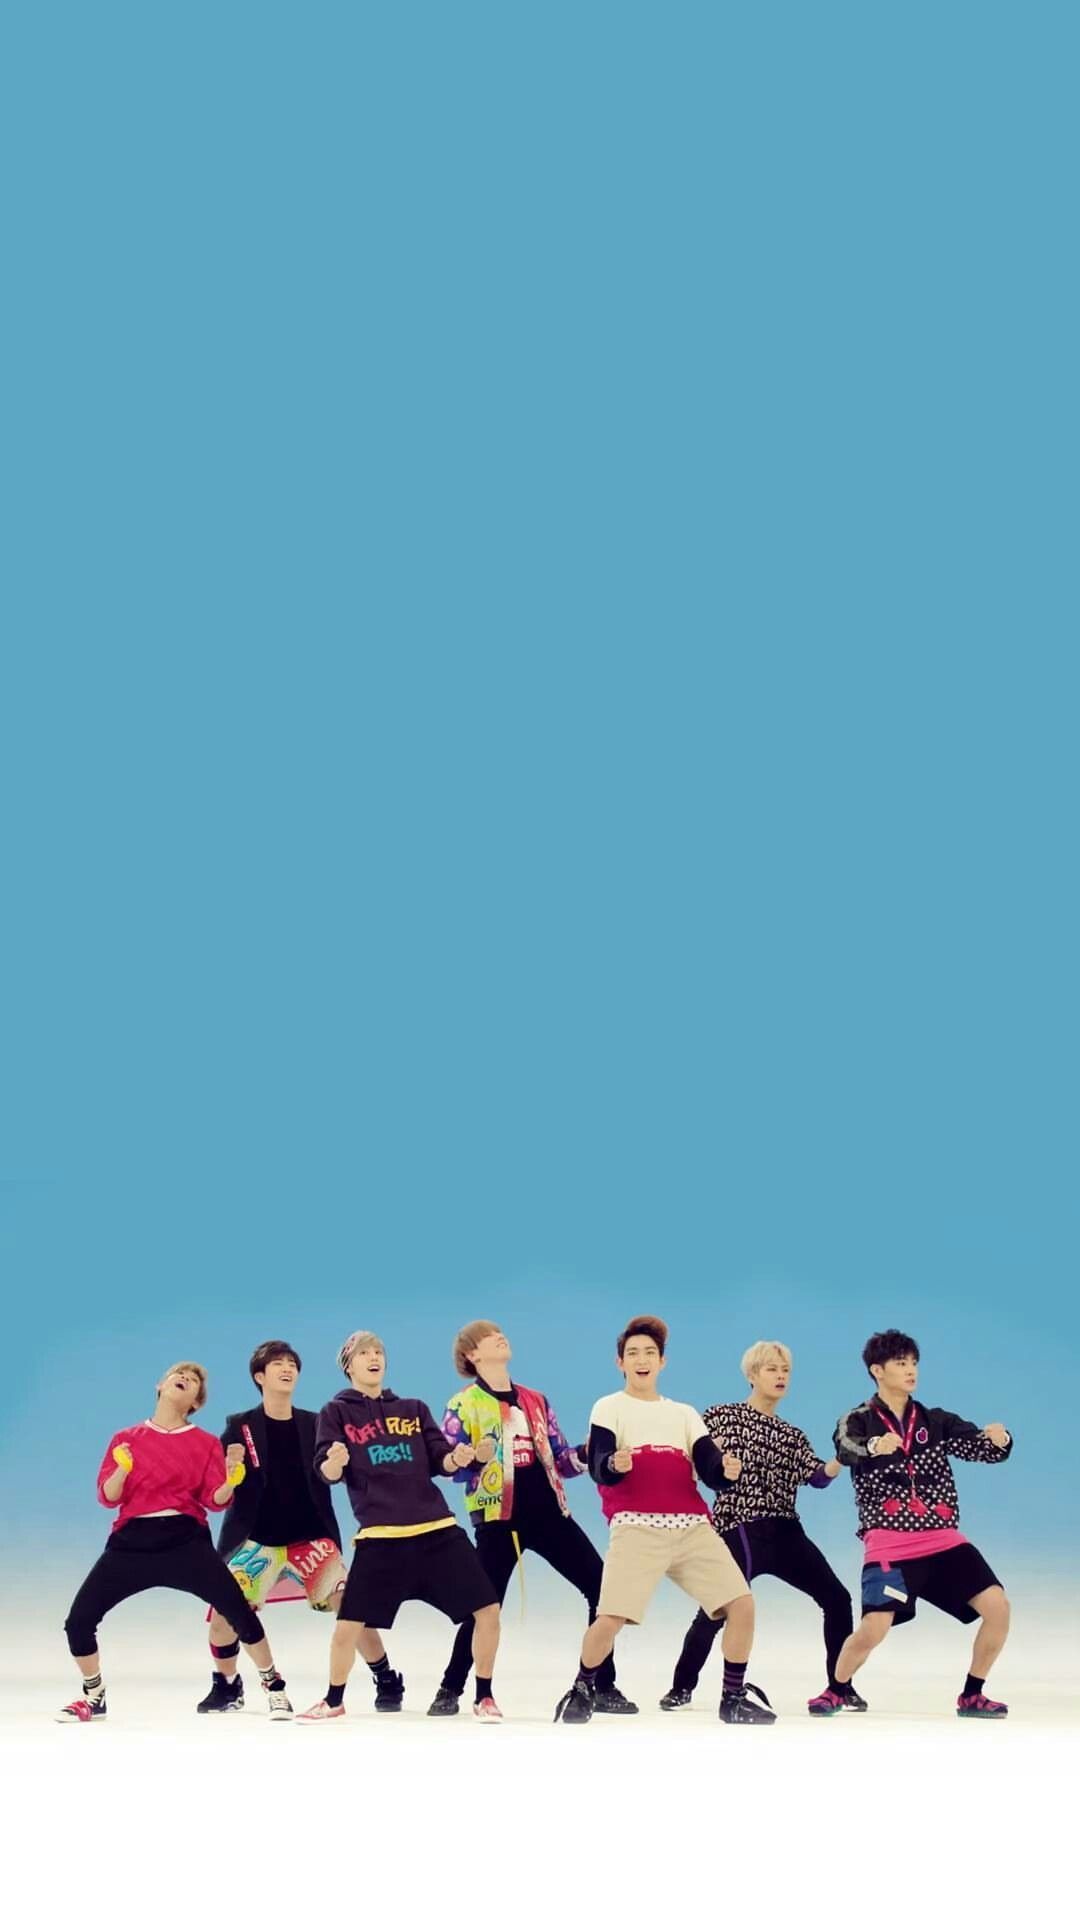 Just right got wallpapers